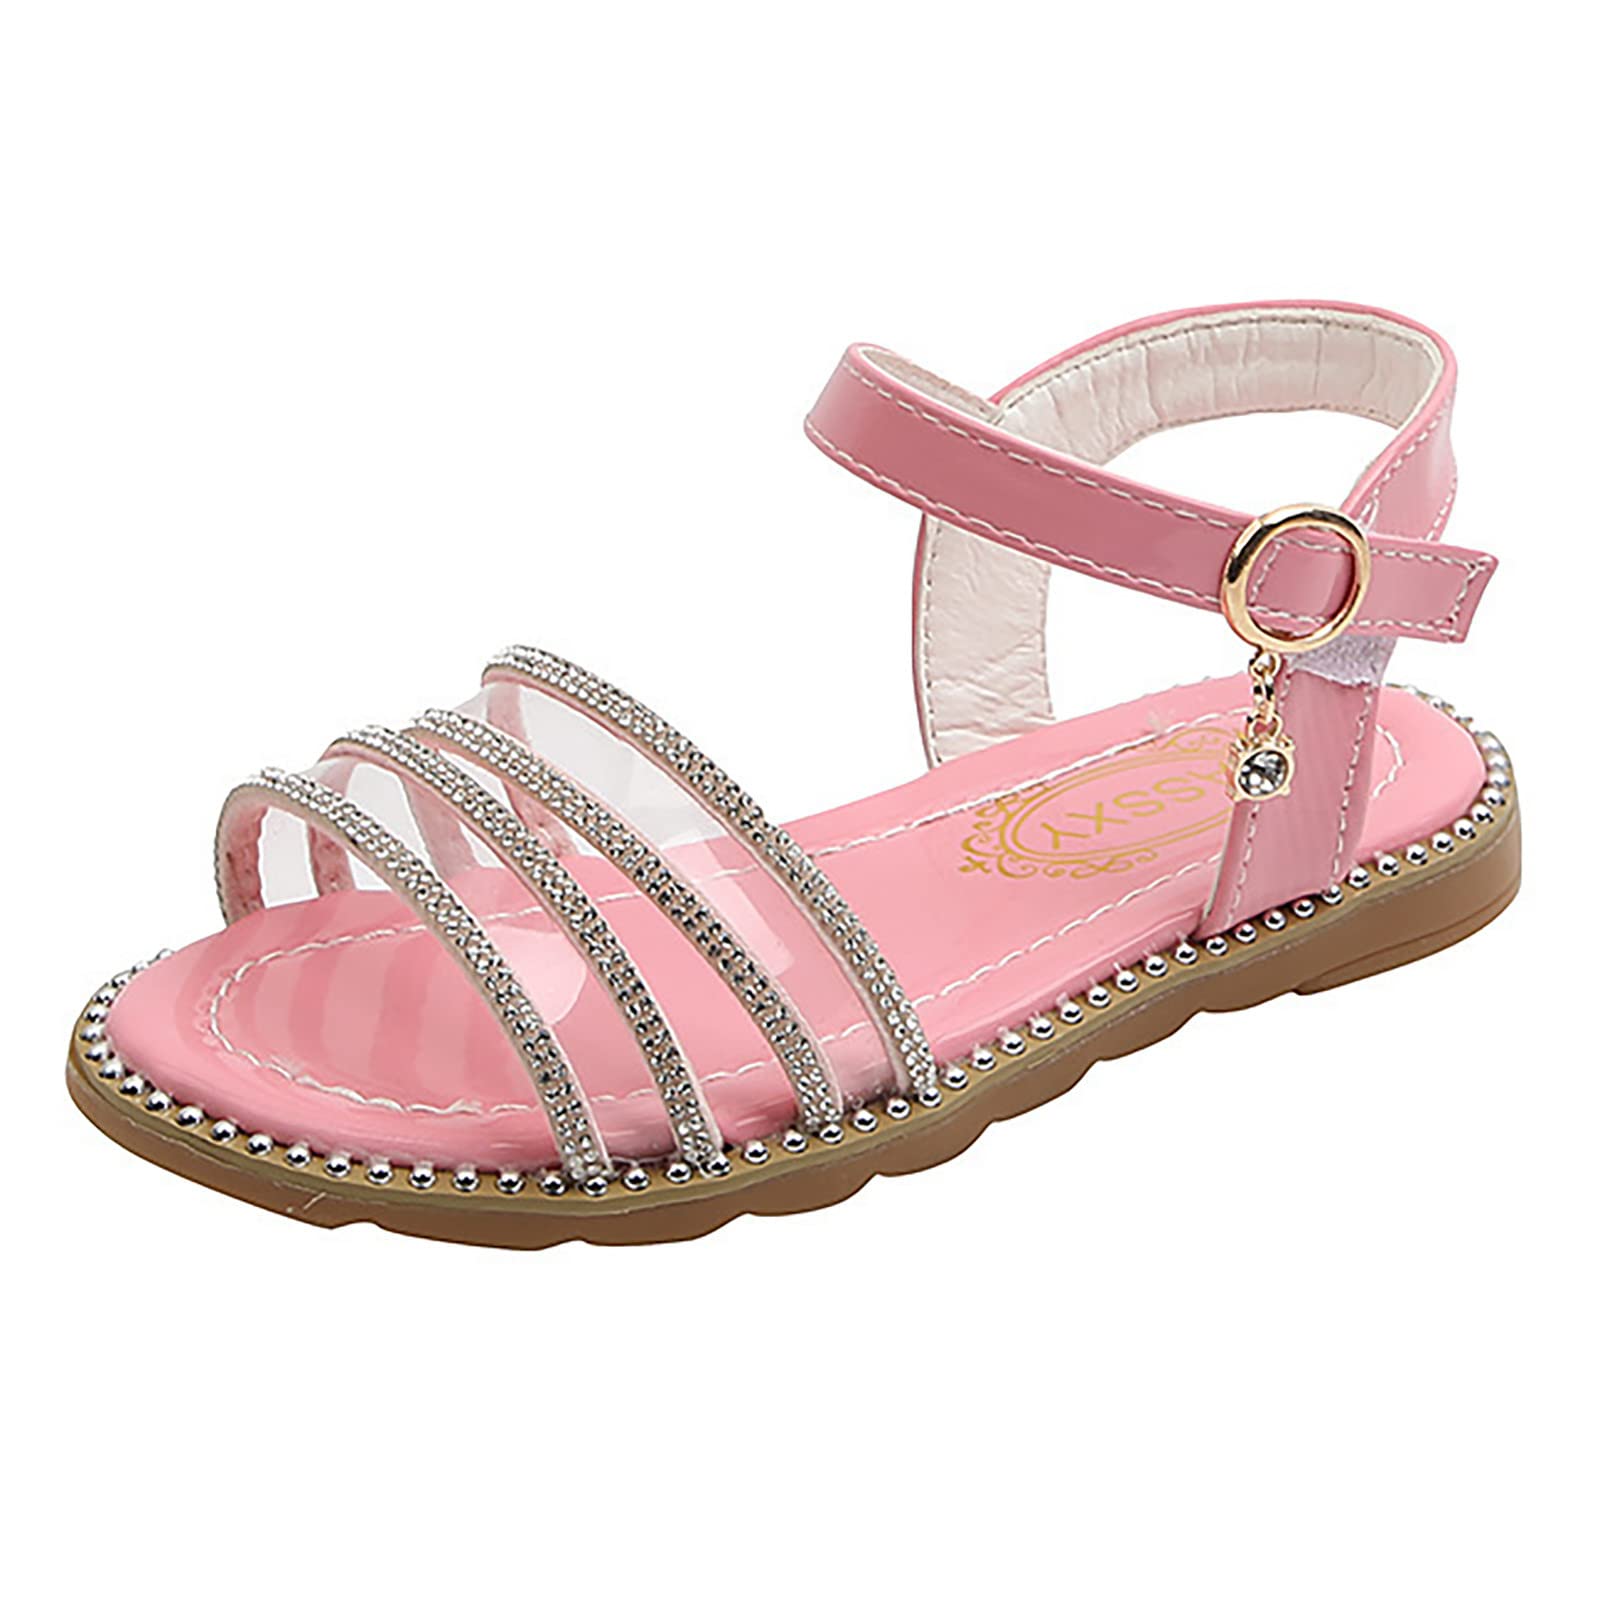 Shoe Slipper Fashion Spring Summer Children Sandals Girls Flat Open Toe Buckle Light And Robe for Girls And Slippers